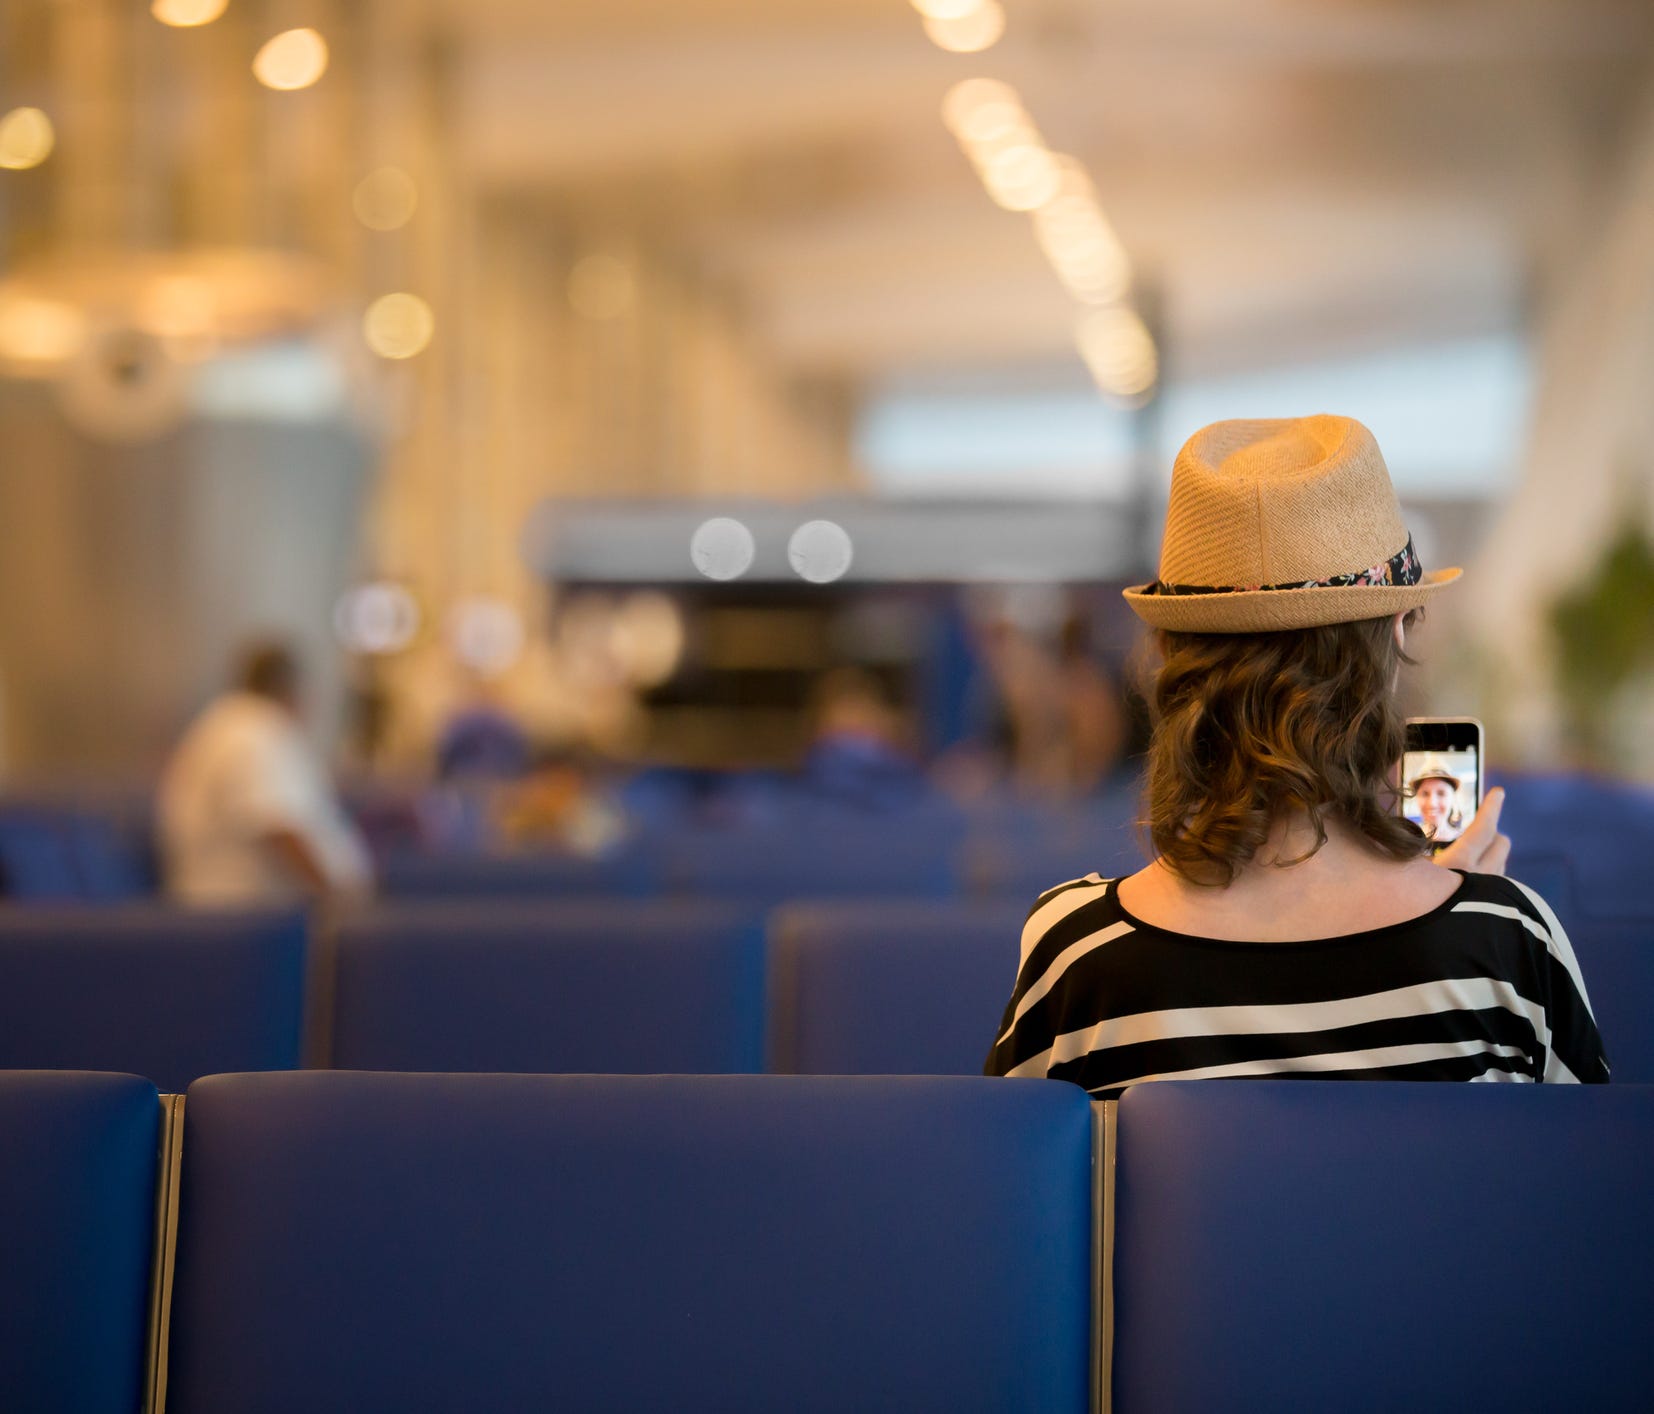 It's open season on the jet set, particularly those who use open, public wireless networks.